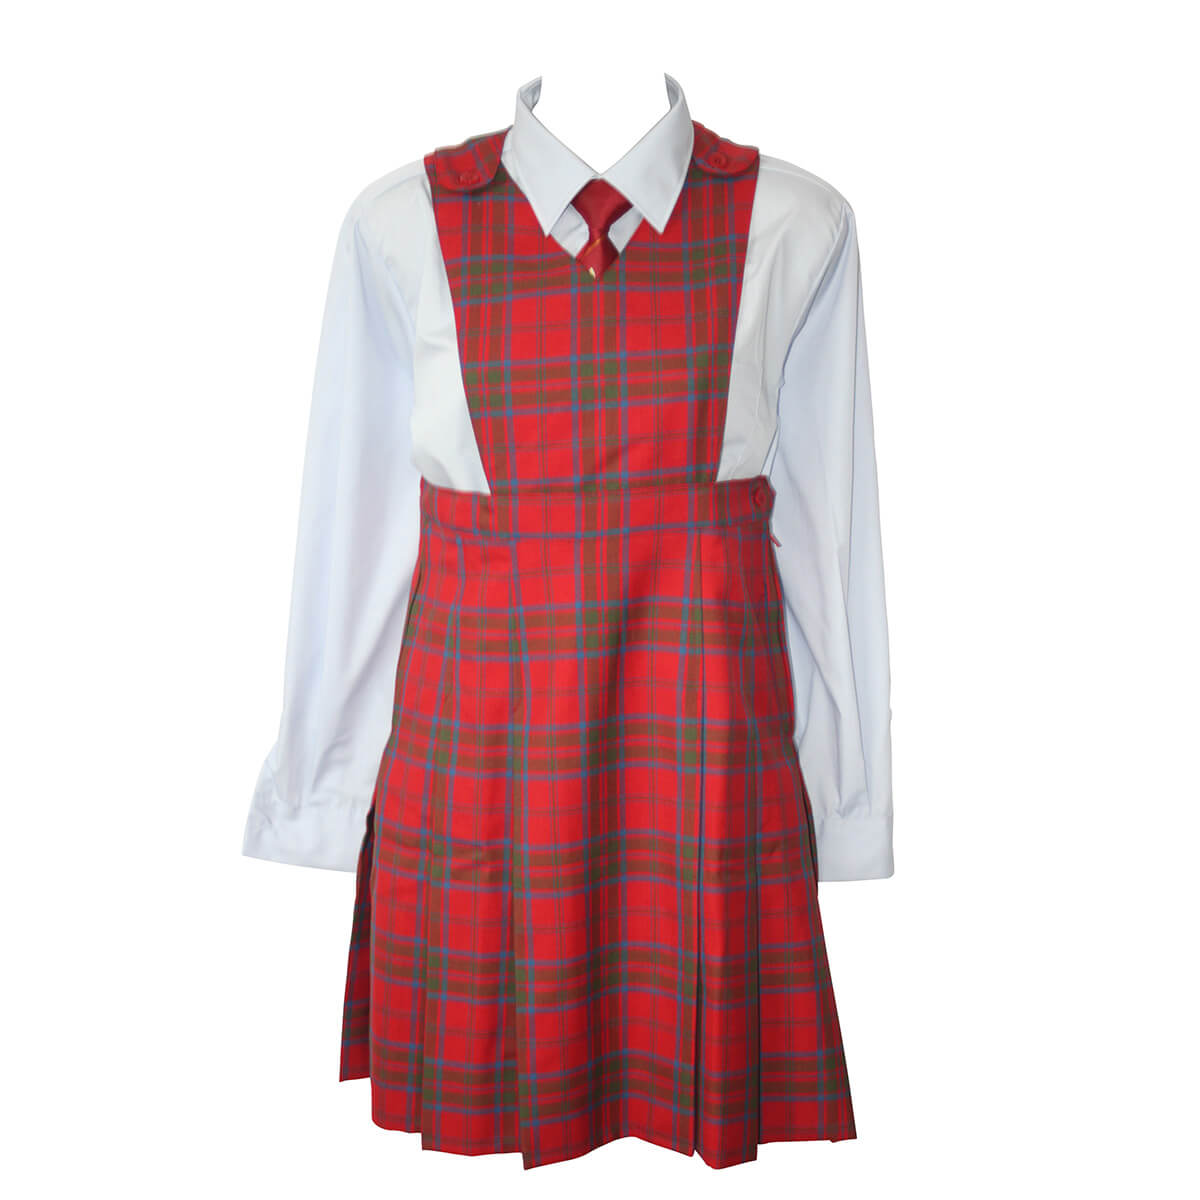 Overnewton ACC Tunic | Overnewton Anglican Community College | Noone